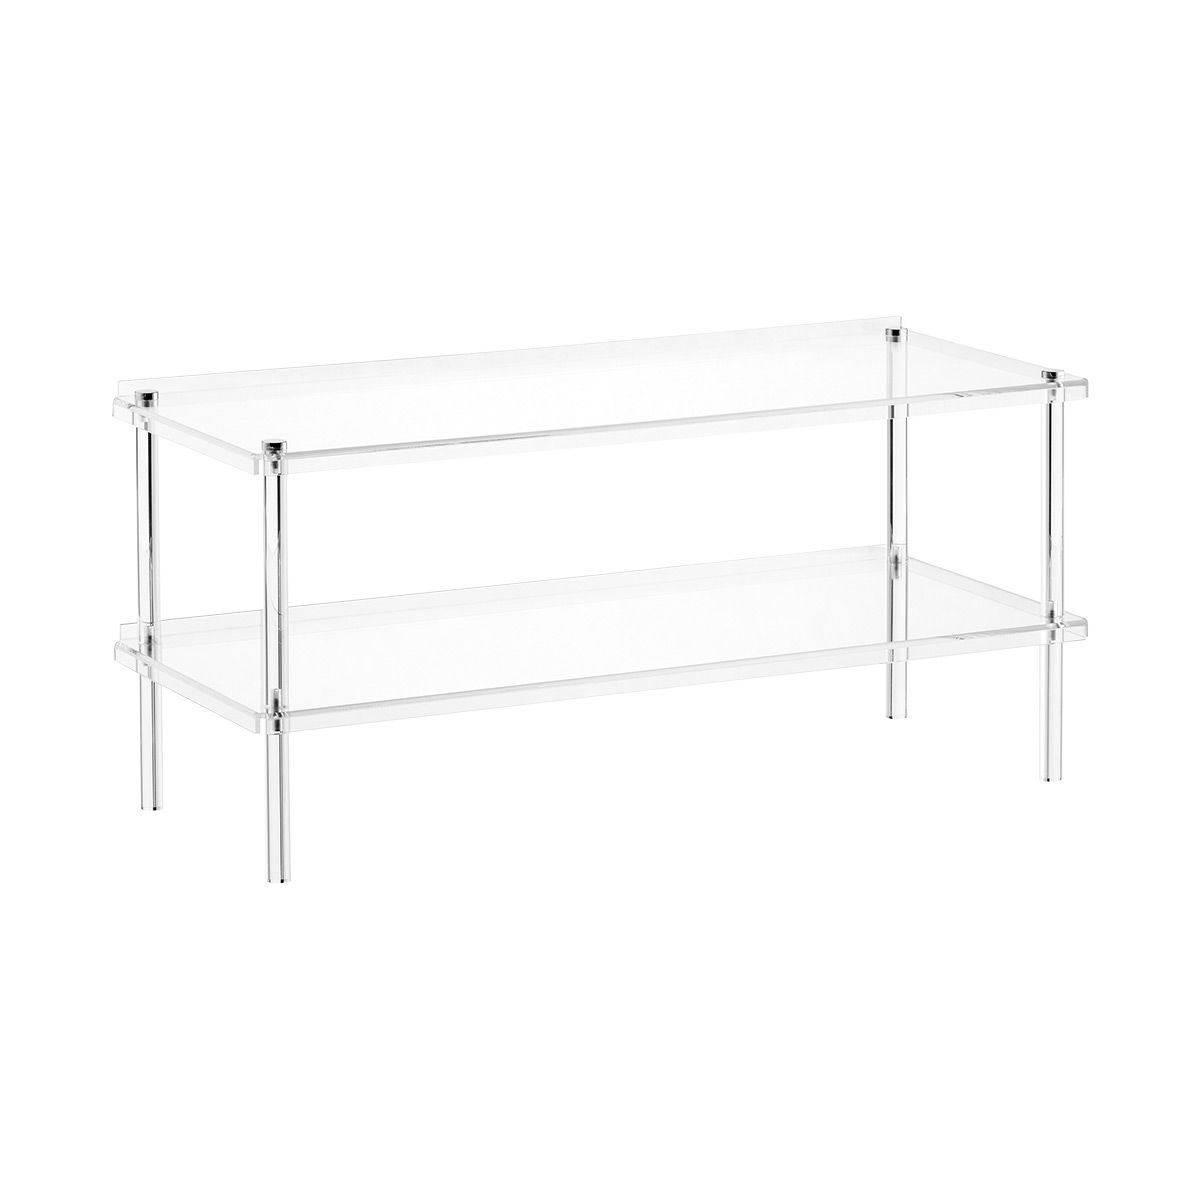 The Container Store Luxe Acrylic Shoe Rack | The Container Store